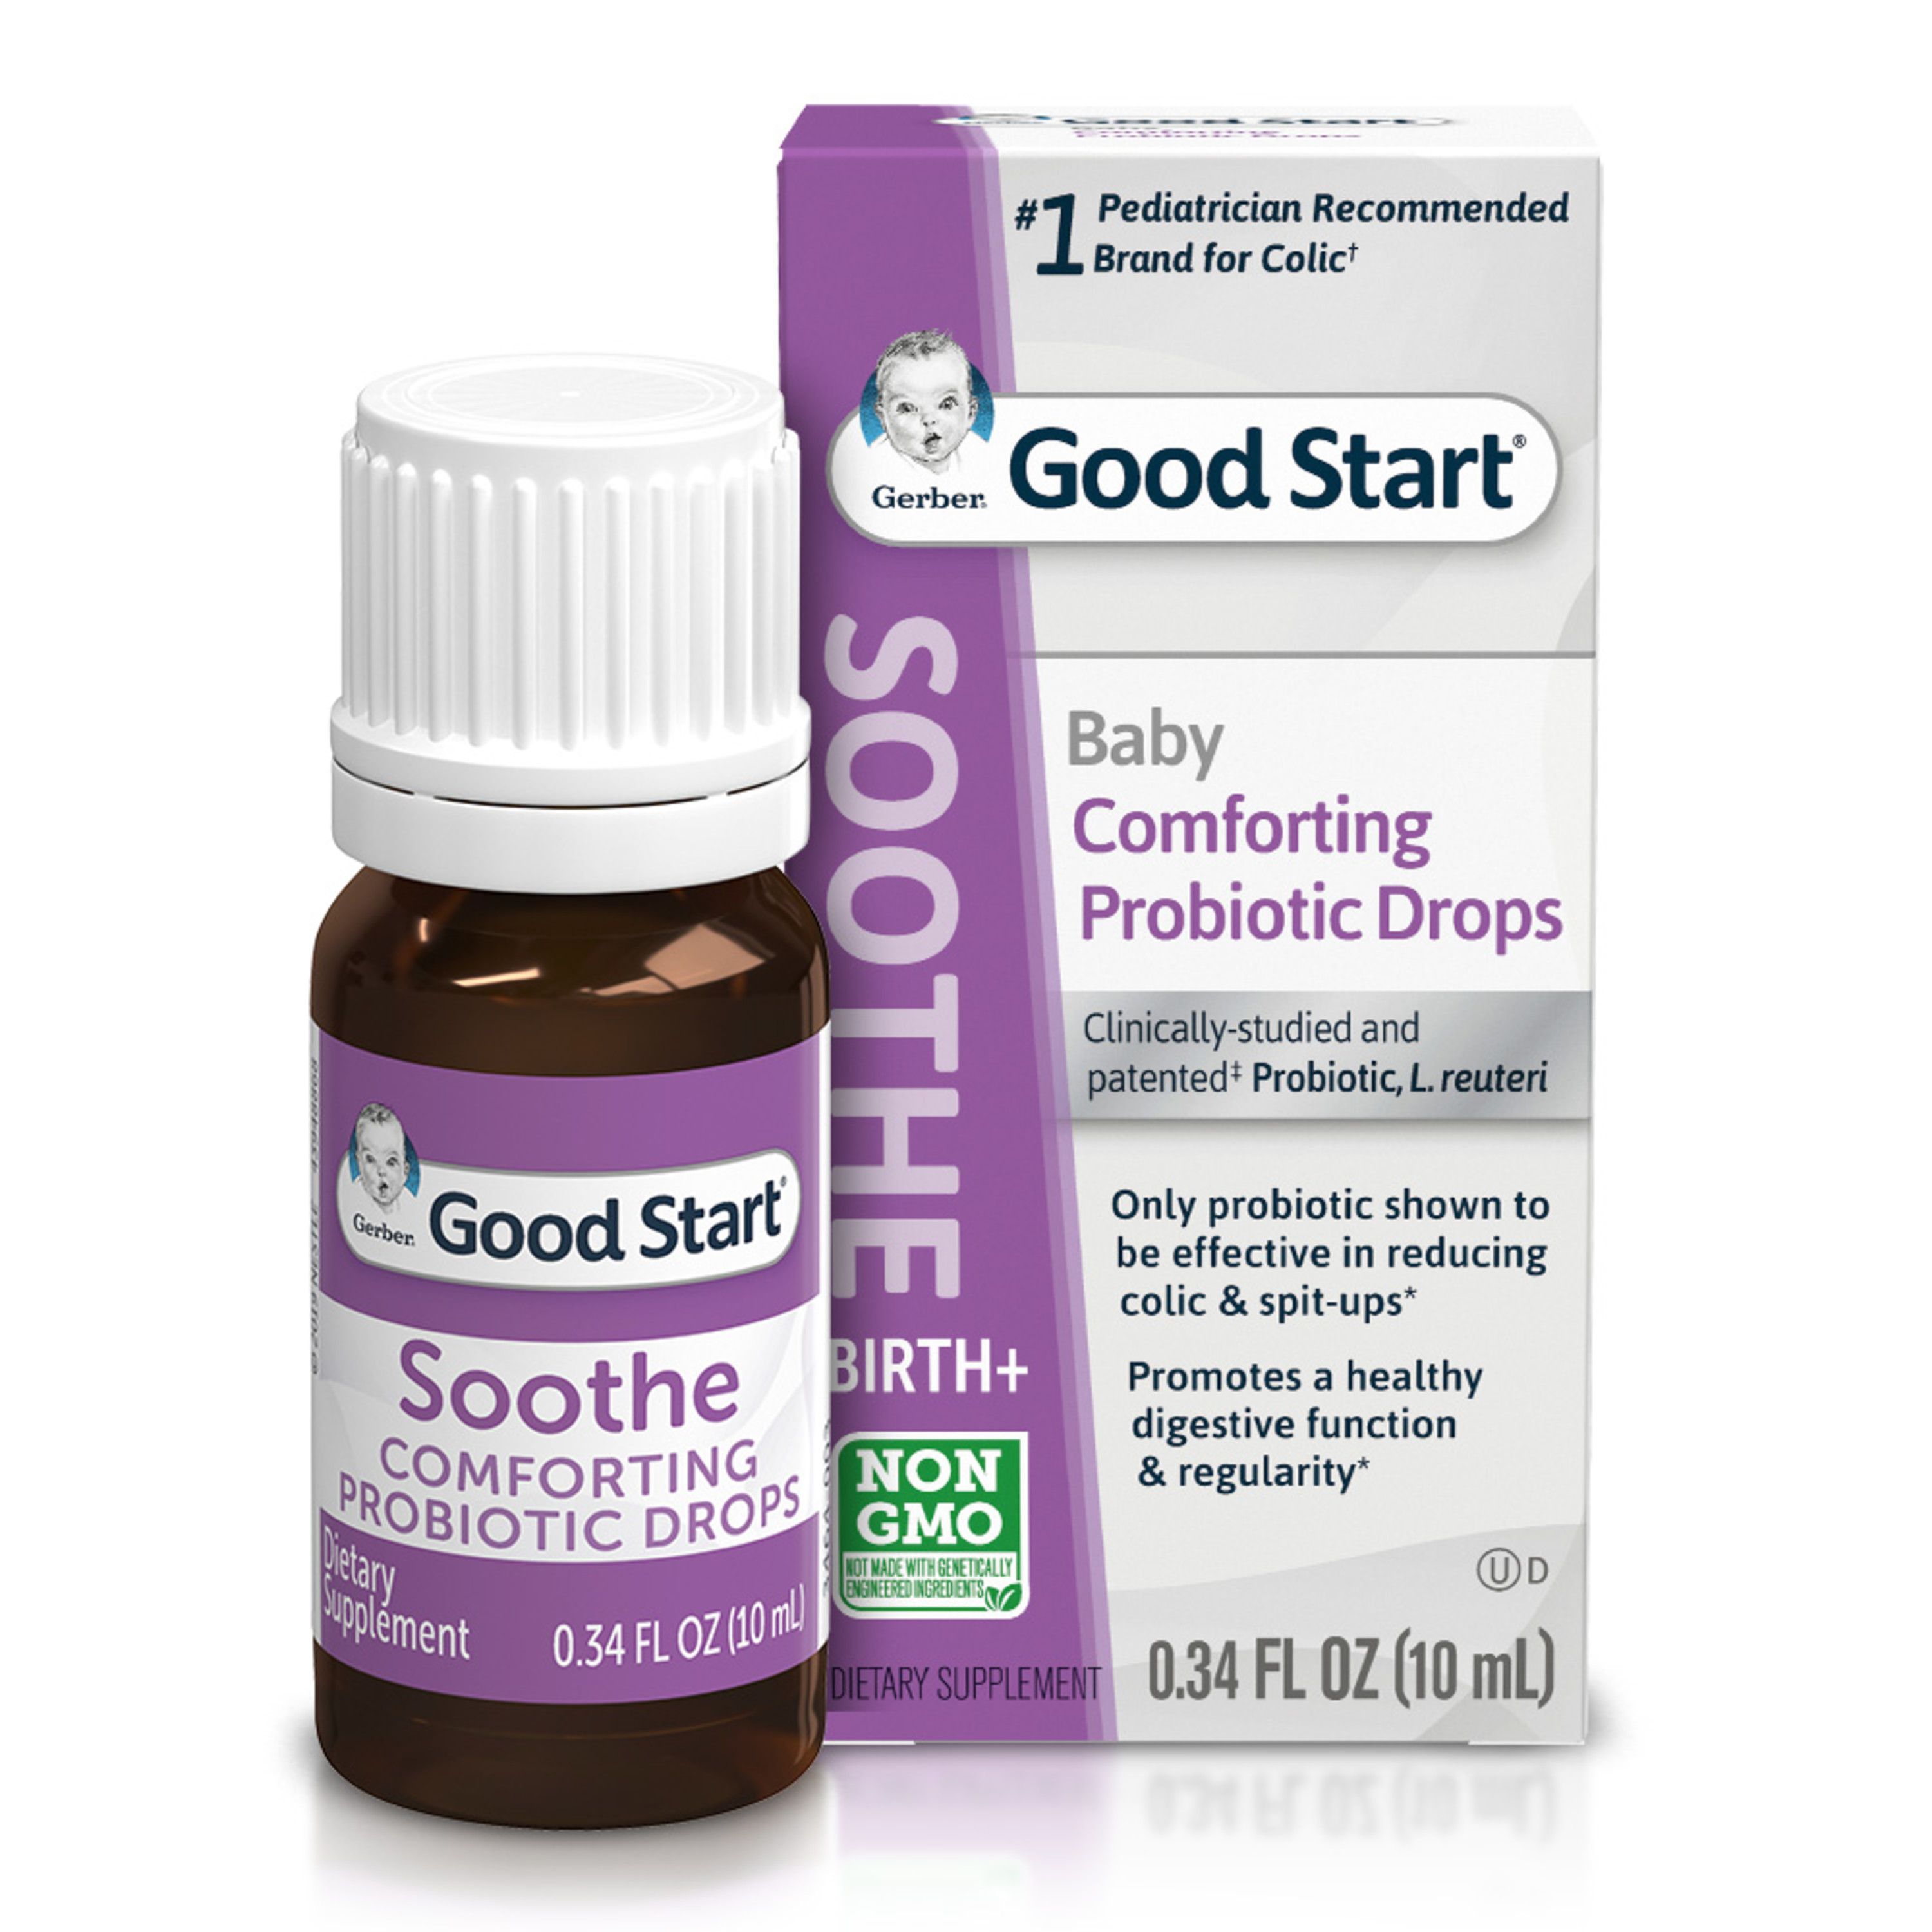 Gerber Good Start Soothe Comforting Baby Probiotic Drops for Dietary Supplement, 0.34 fl. oz. Bottle - image 3 of 8